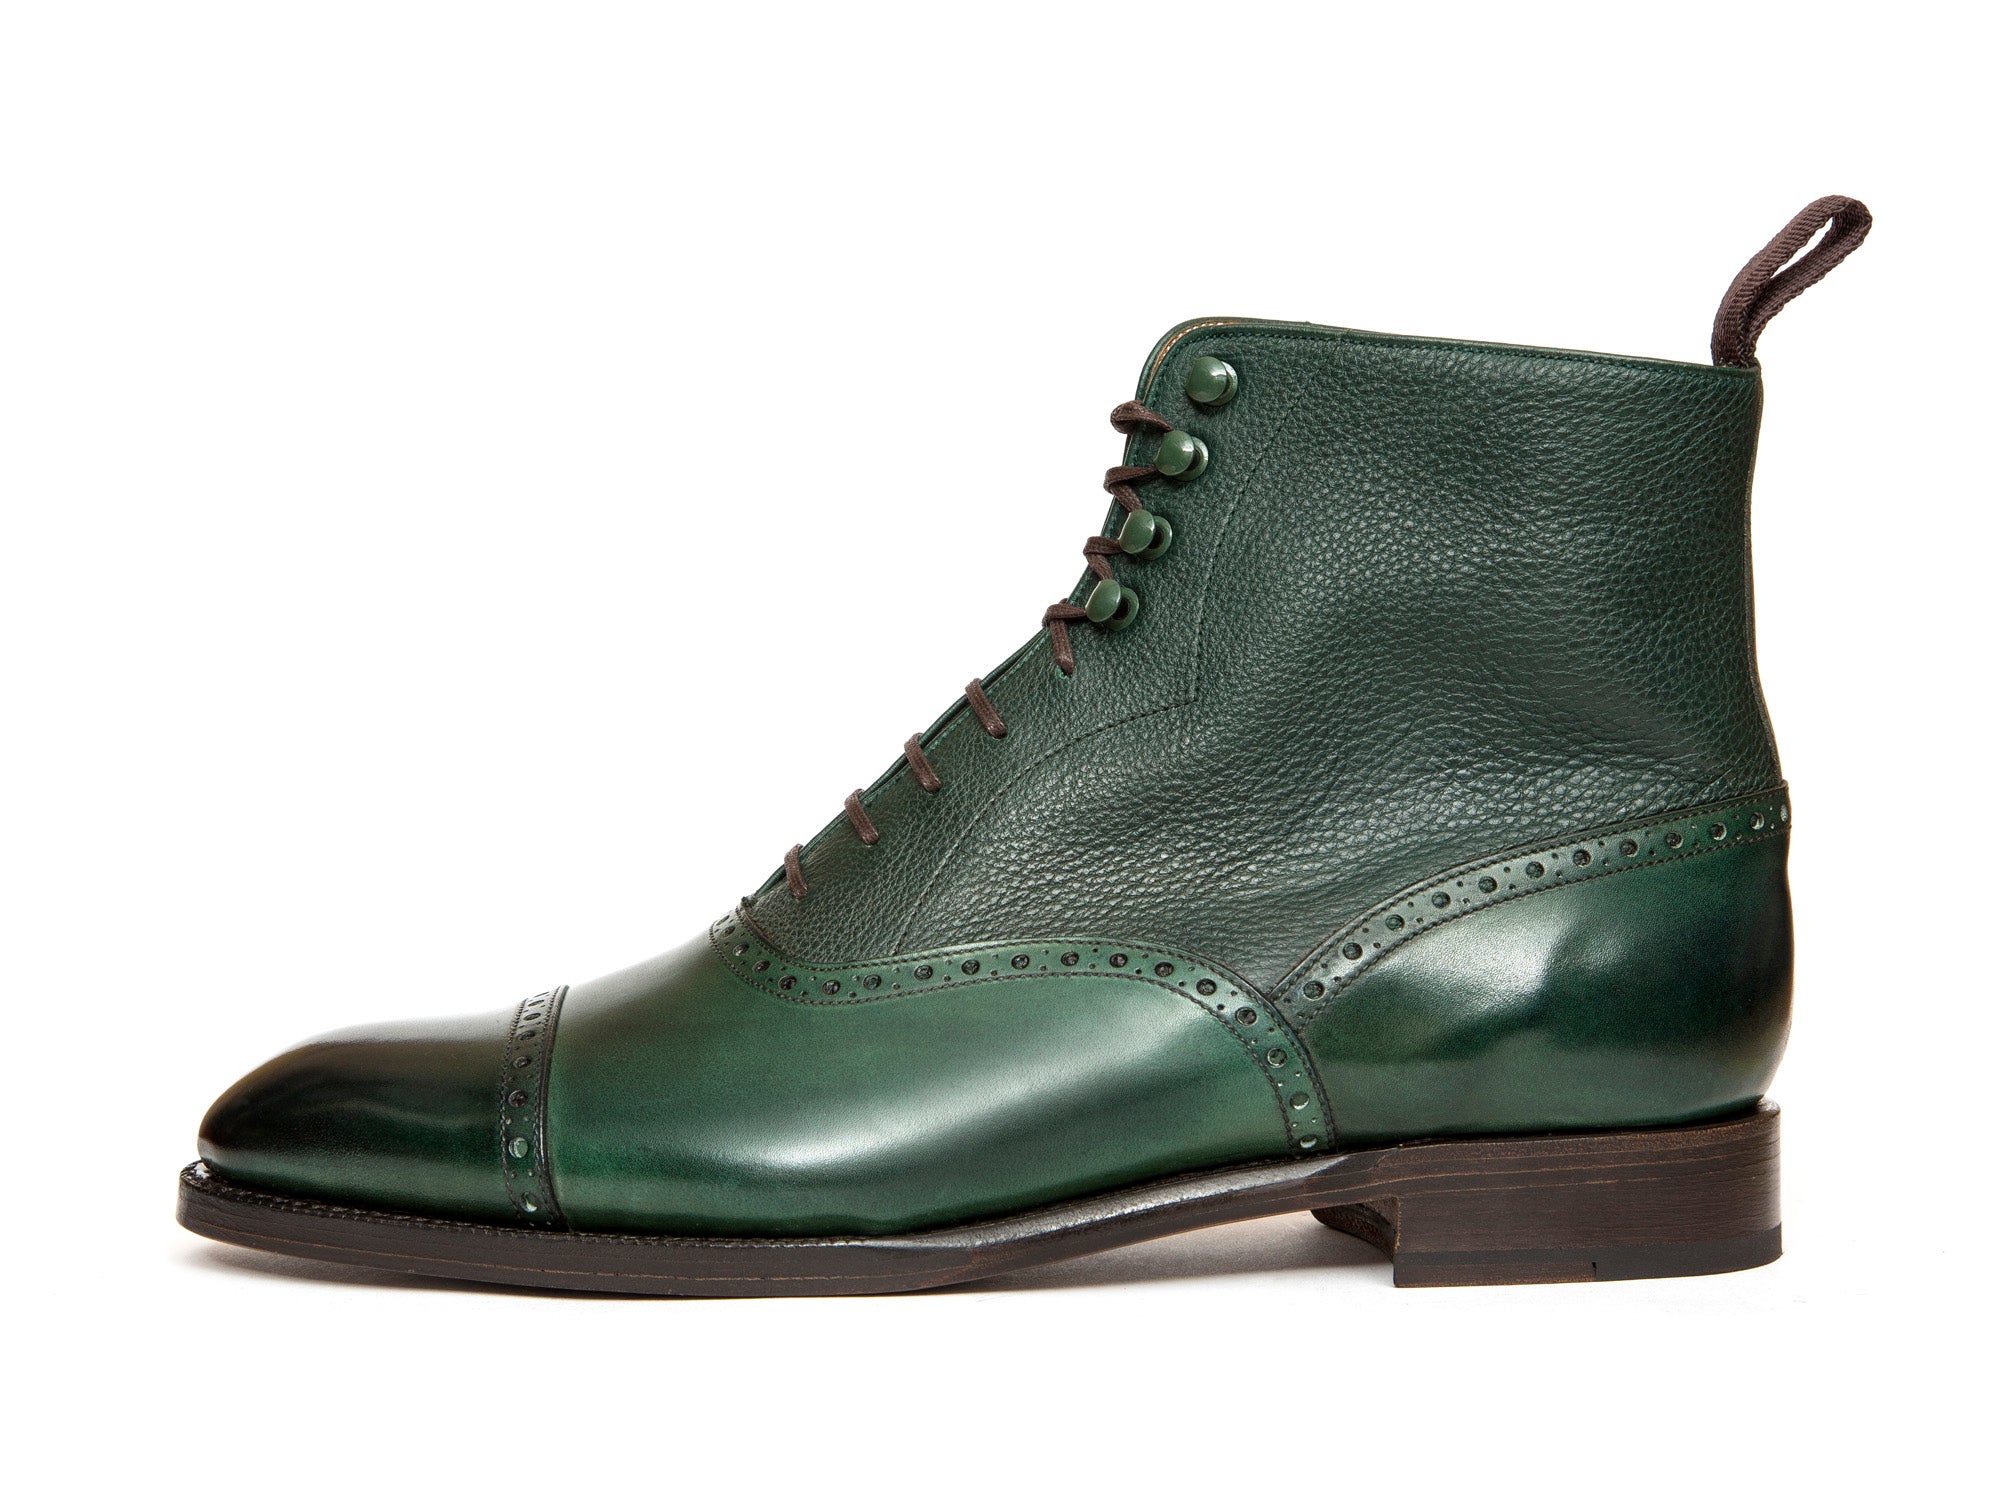 Seaview - MTO - Forest Calf / Green Soft Grain - NGT Last - Single Leather Sole